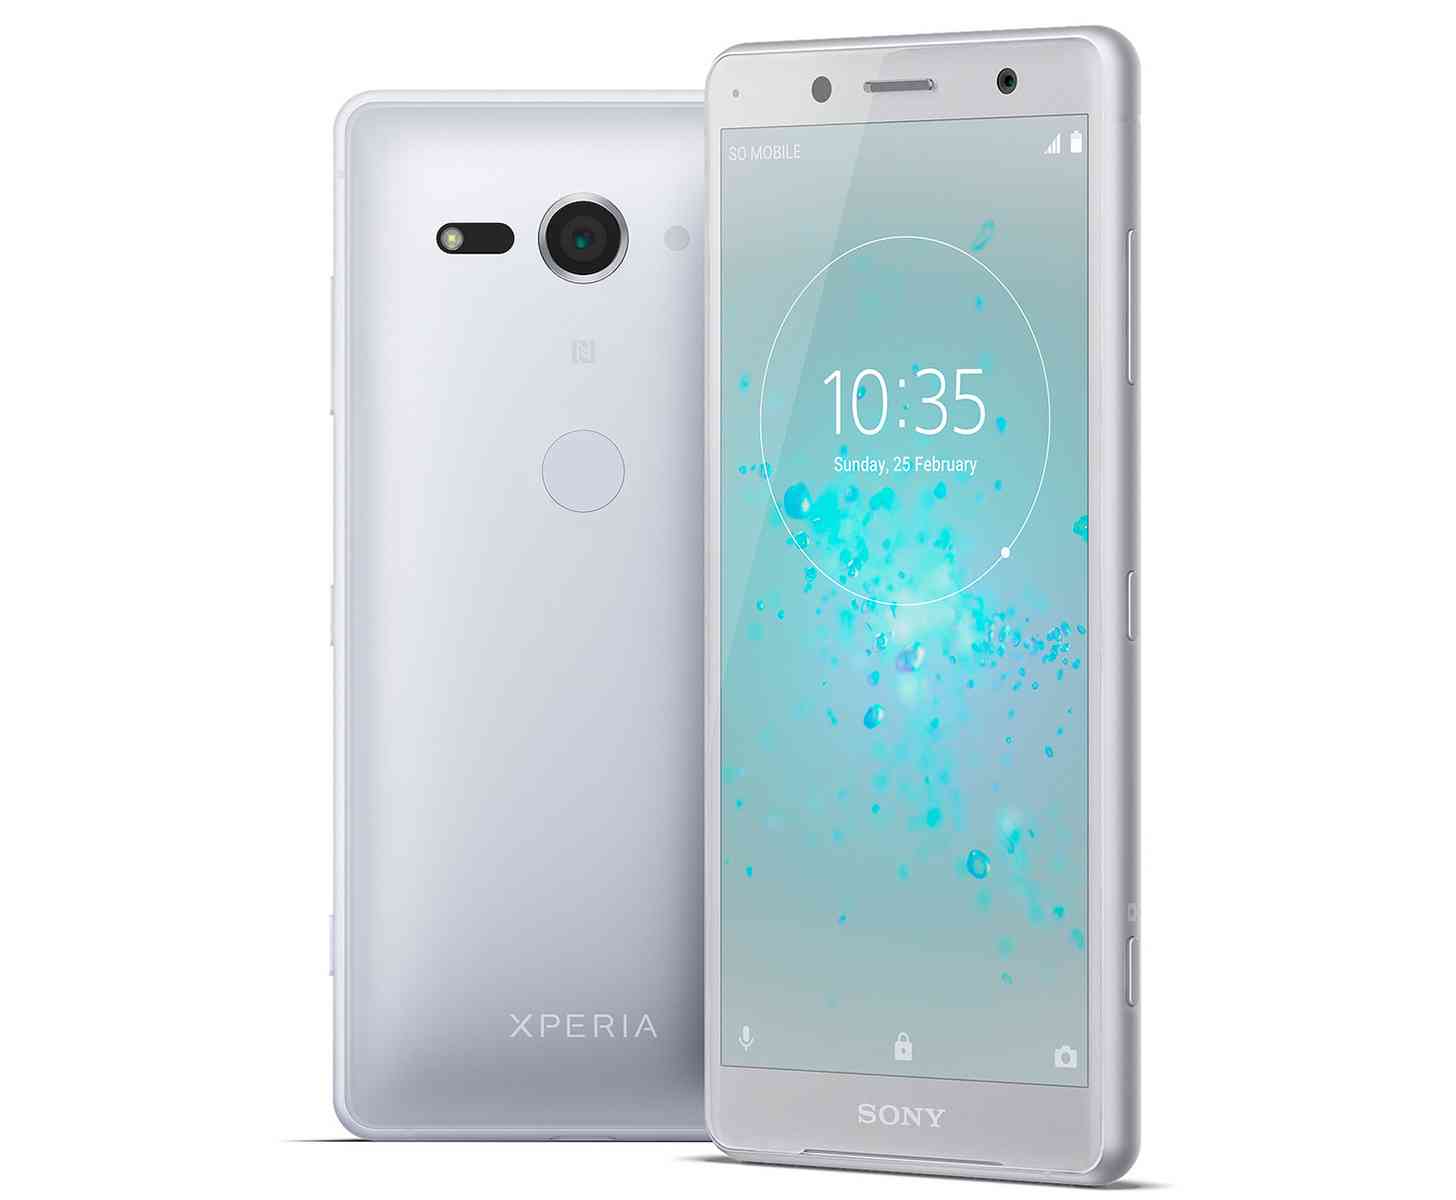 Sony Xperia XZ2 Compact official